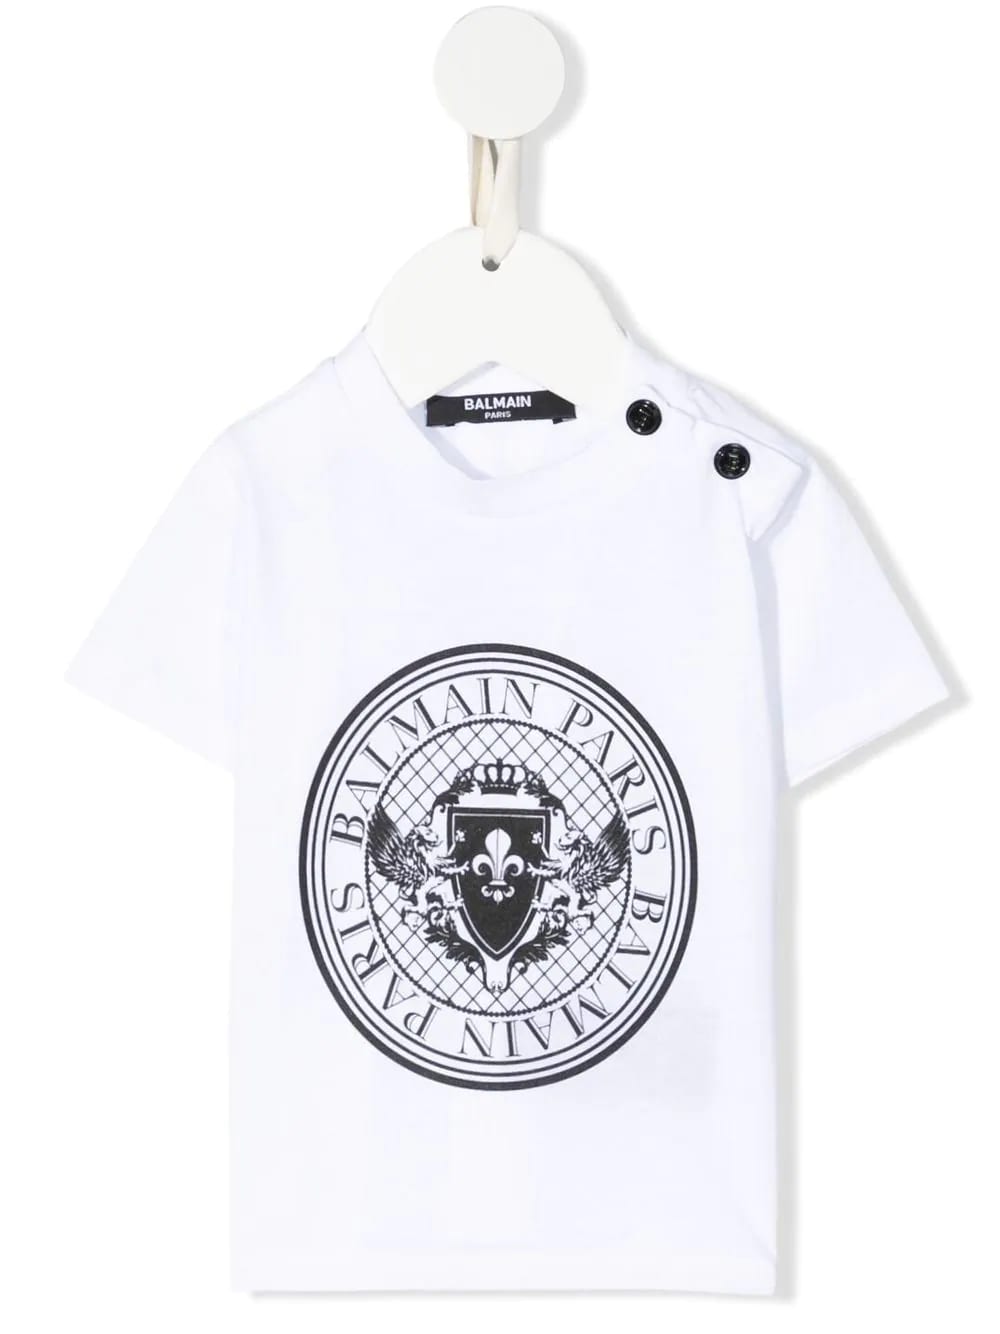 Baby White T-shirt With Buttons And Balmain Medallion Print